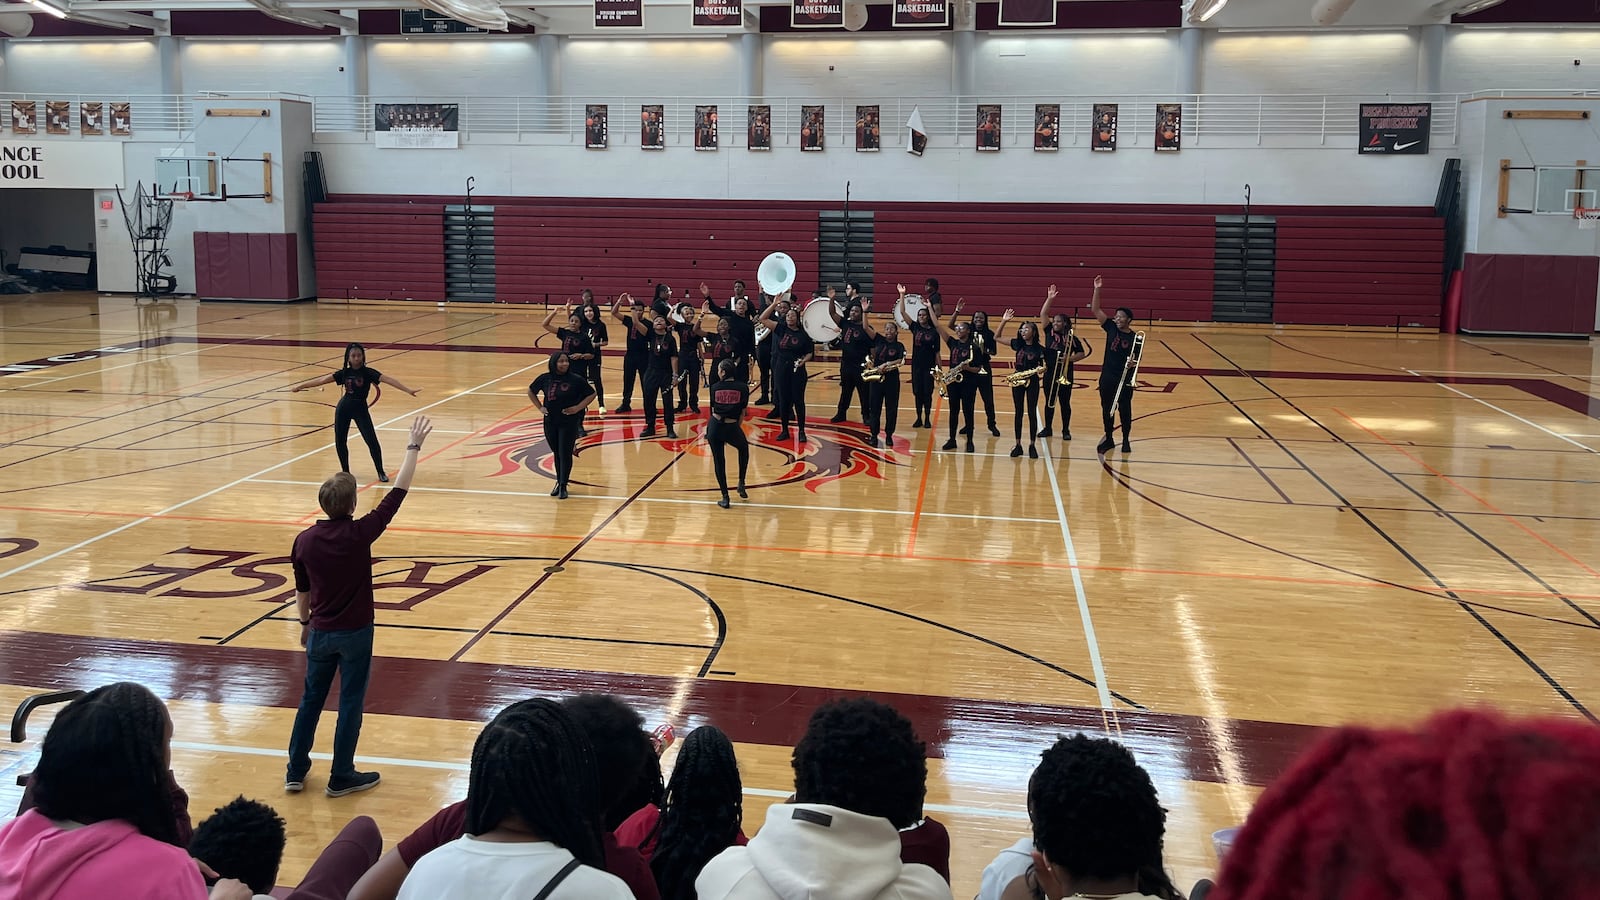 A marching band performs on the floor of the high school gym with students watching.